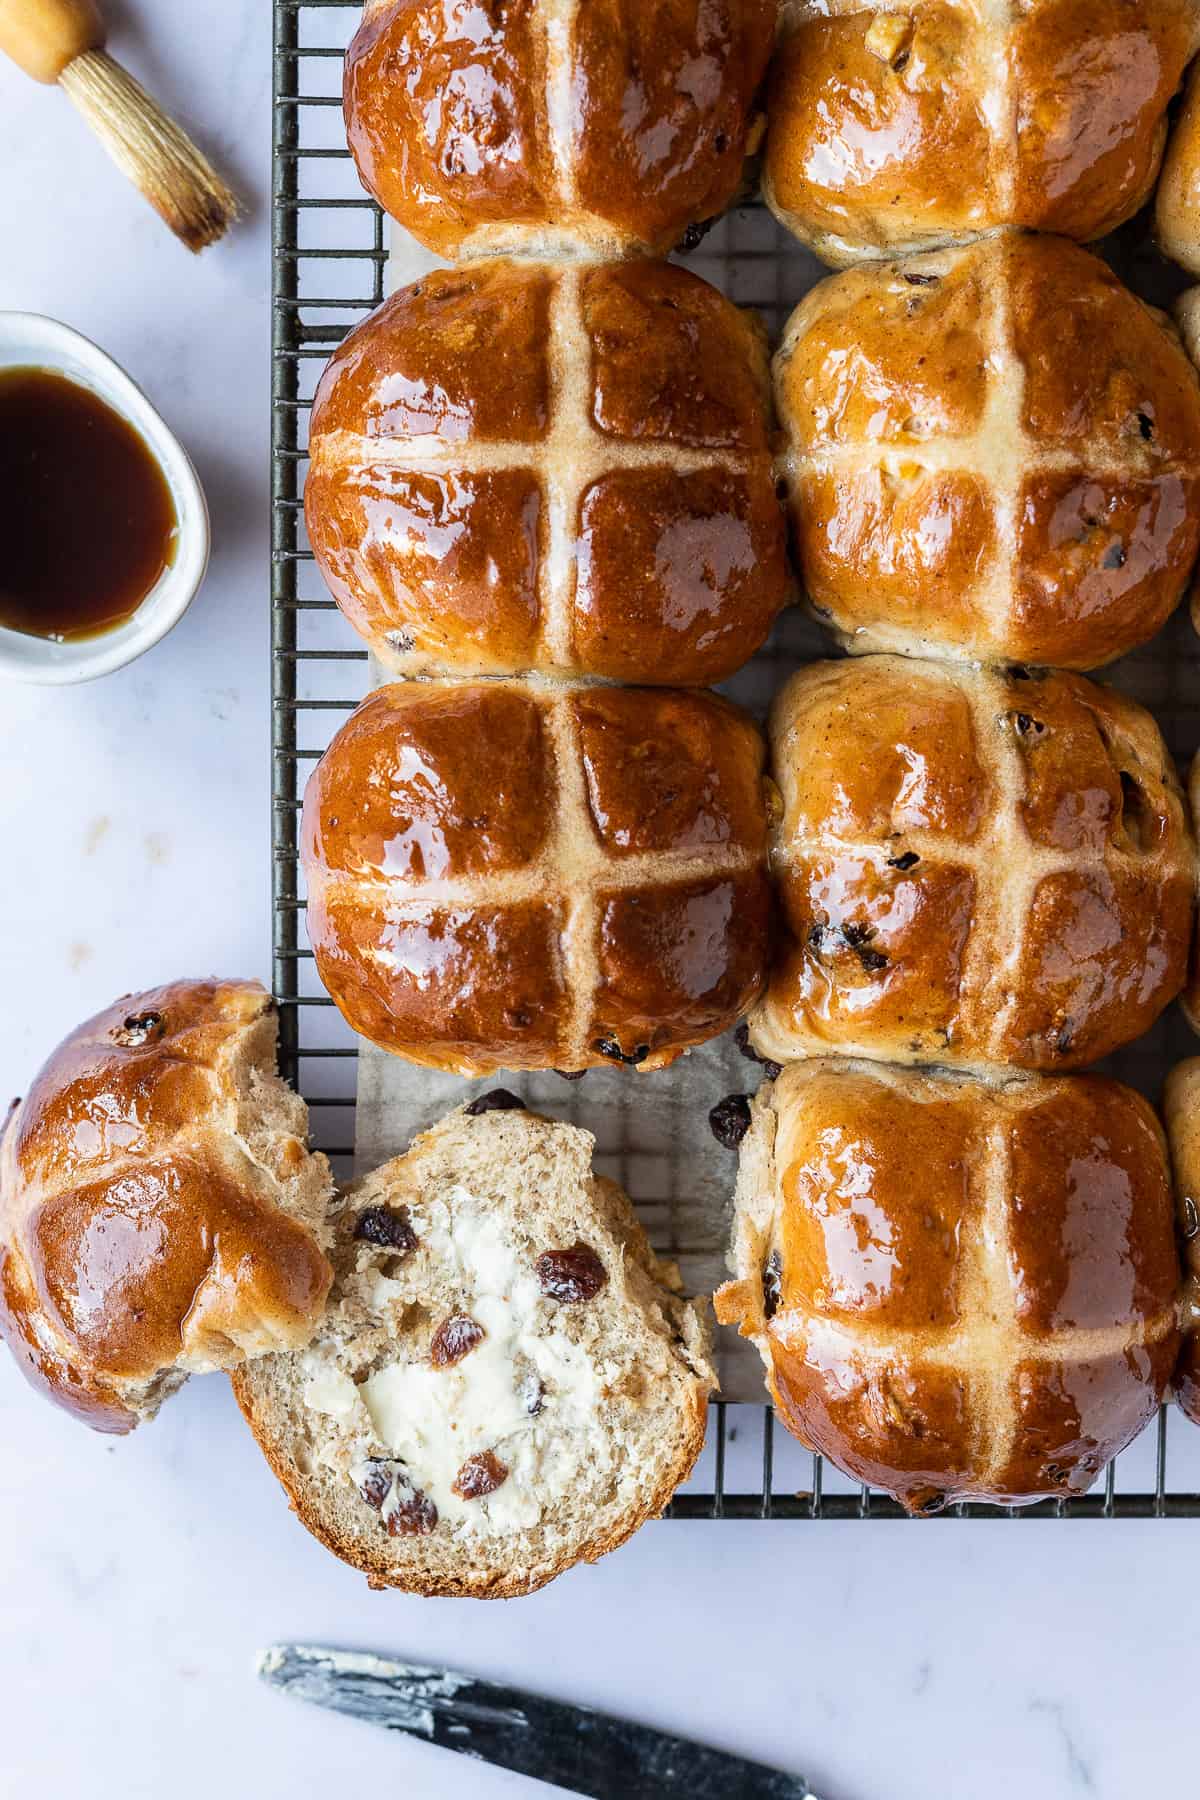 vegan hot cross buns on a wire rack, one split and buttered with a bowl of maple syrup and a brush.